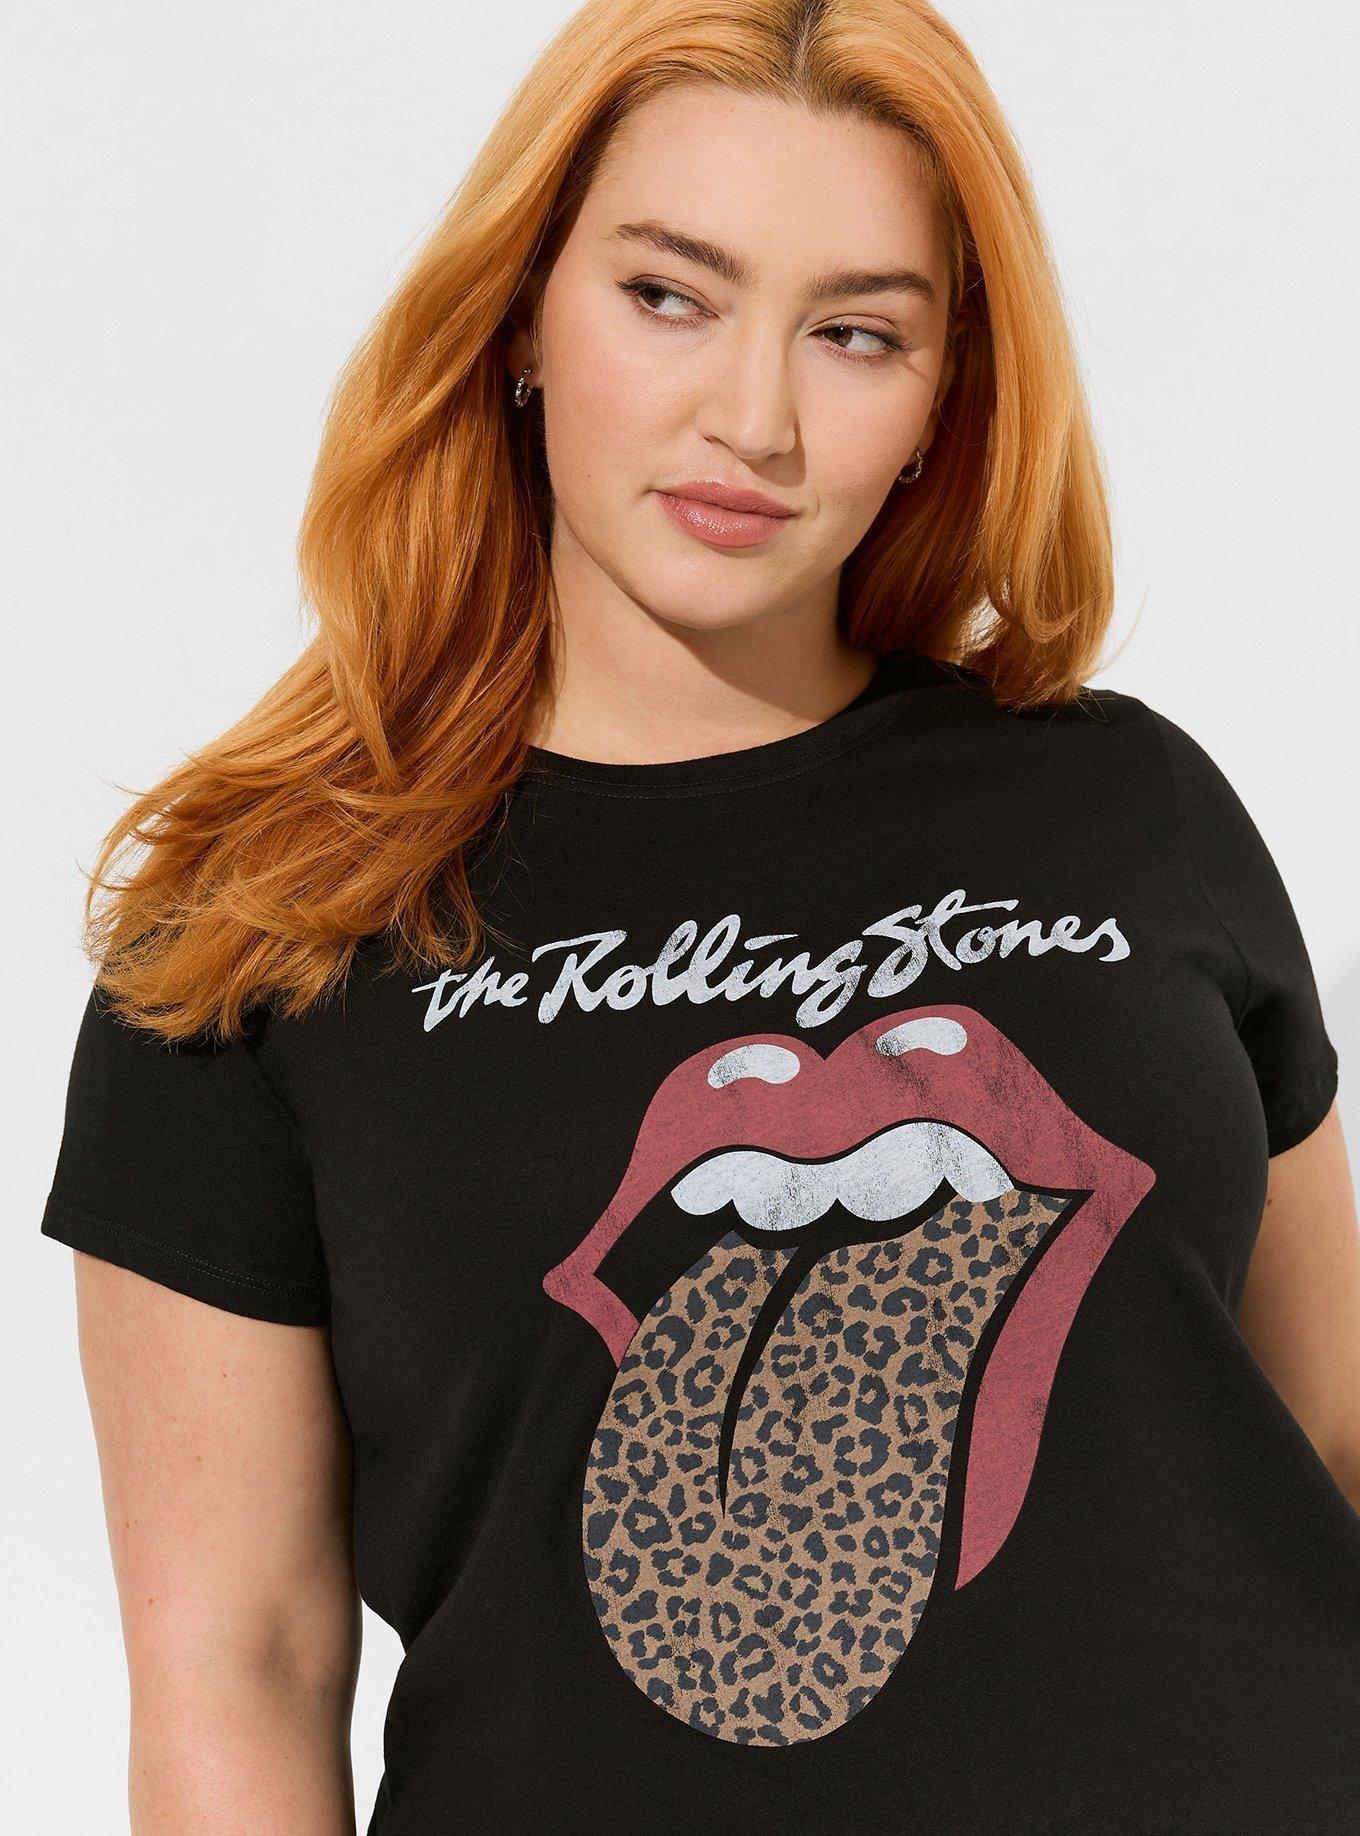 Leopard, red mouth, Rolling Stones. Leopard, Cheetah print, Animal